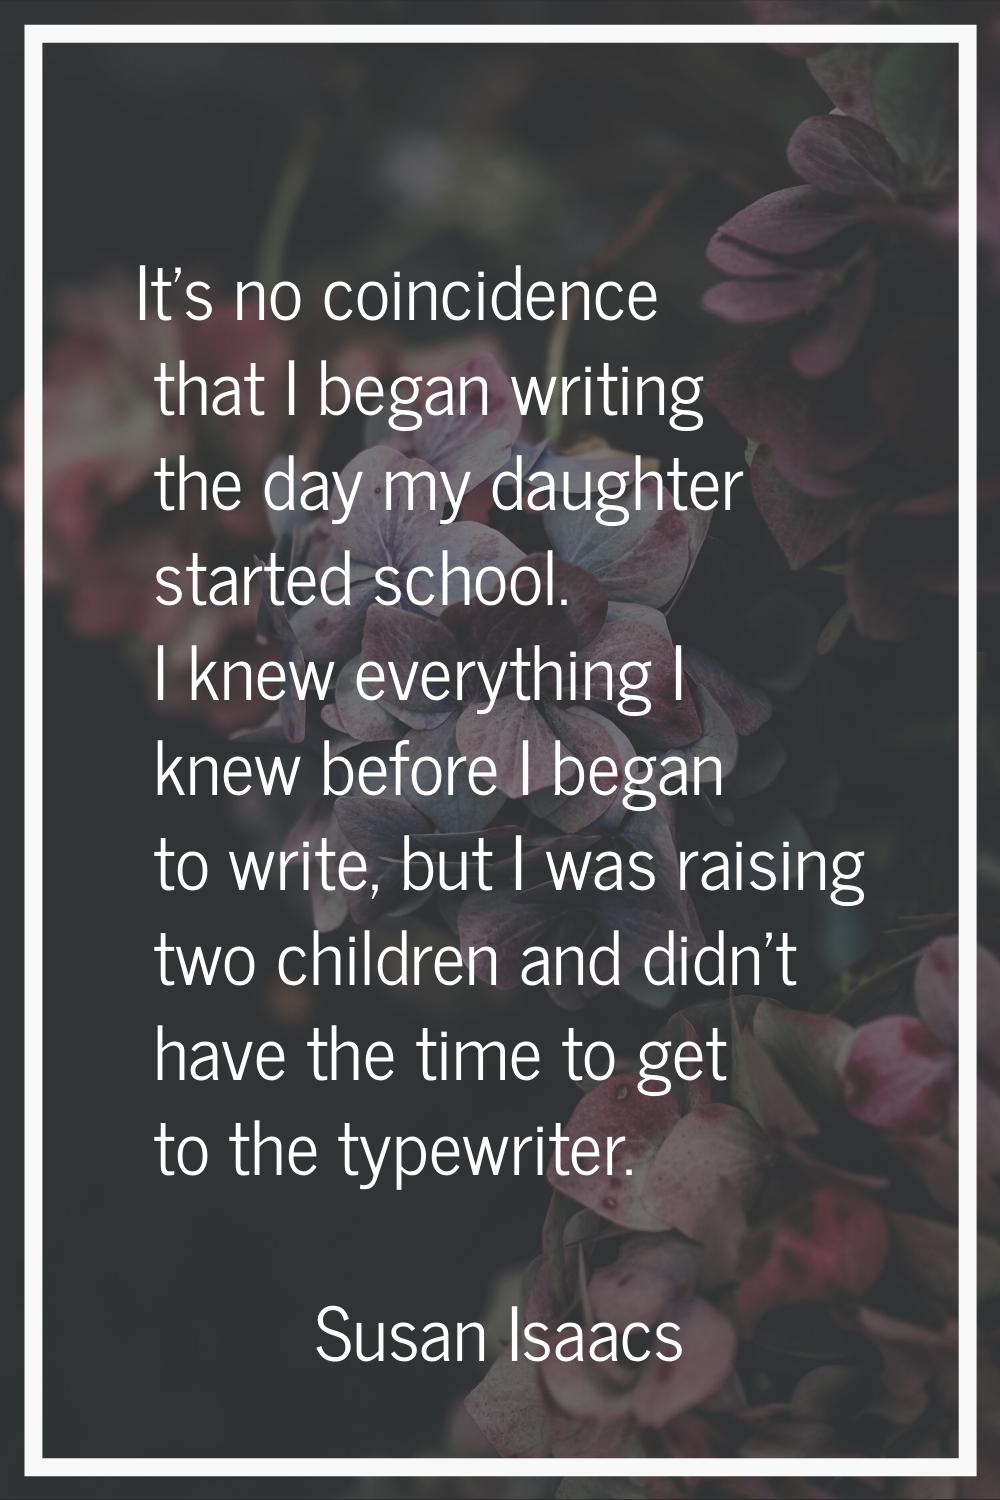 It's no coincidence that I began writing the day my daughter started school. I knew everything I kn